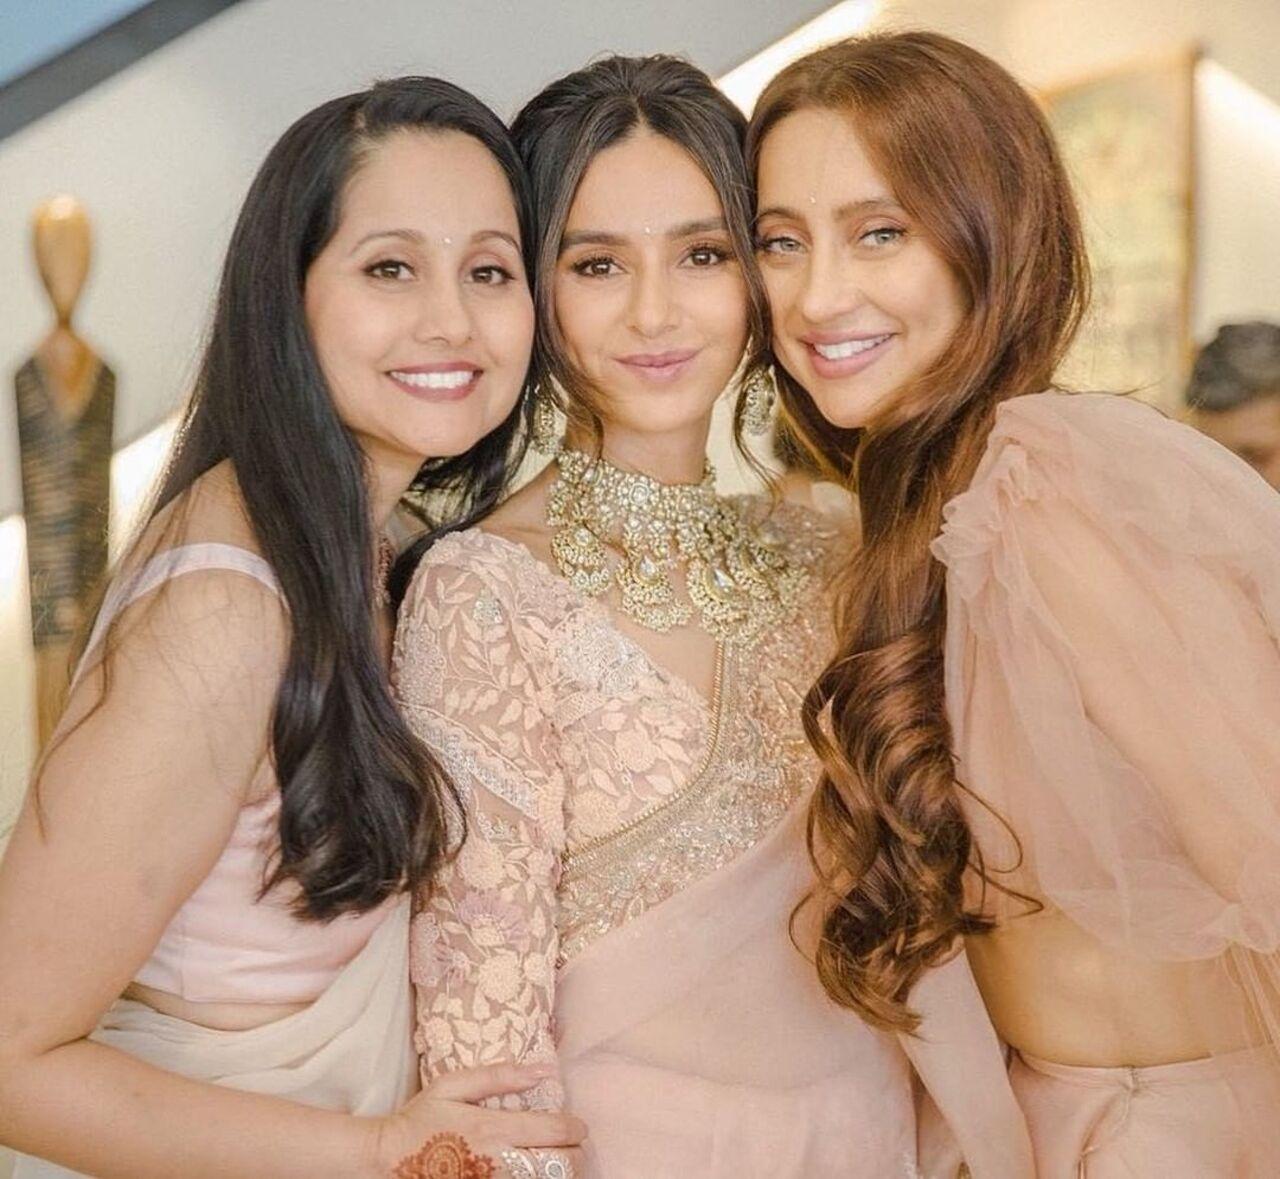 Shibani Dandekar's wedding was all about love, having fun, making ceremonies and family time. The actress posed with her sisters during her pre-wedding festivities